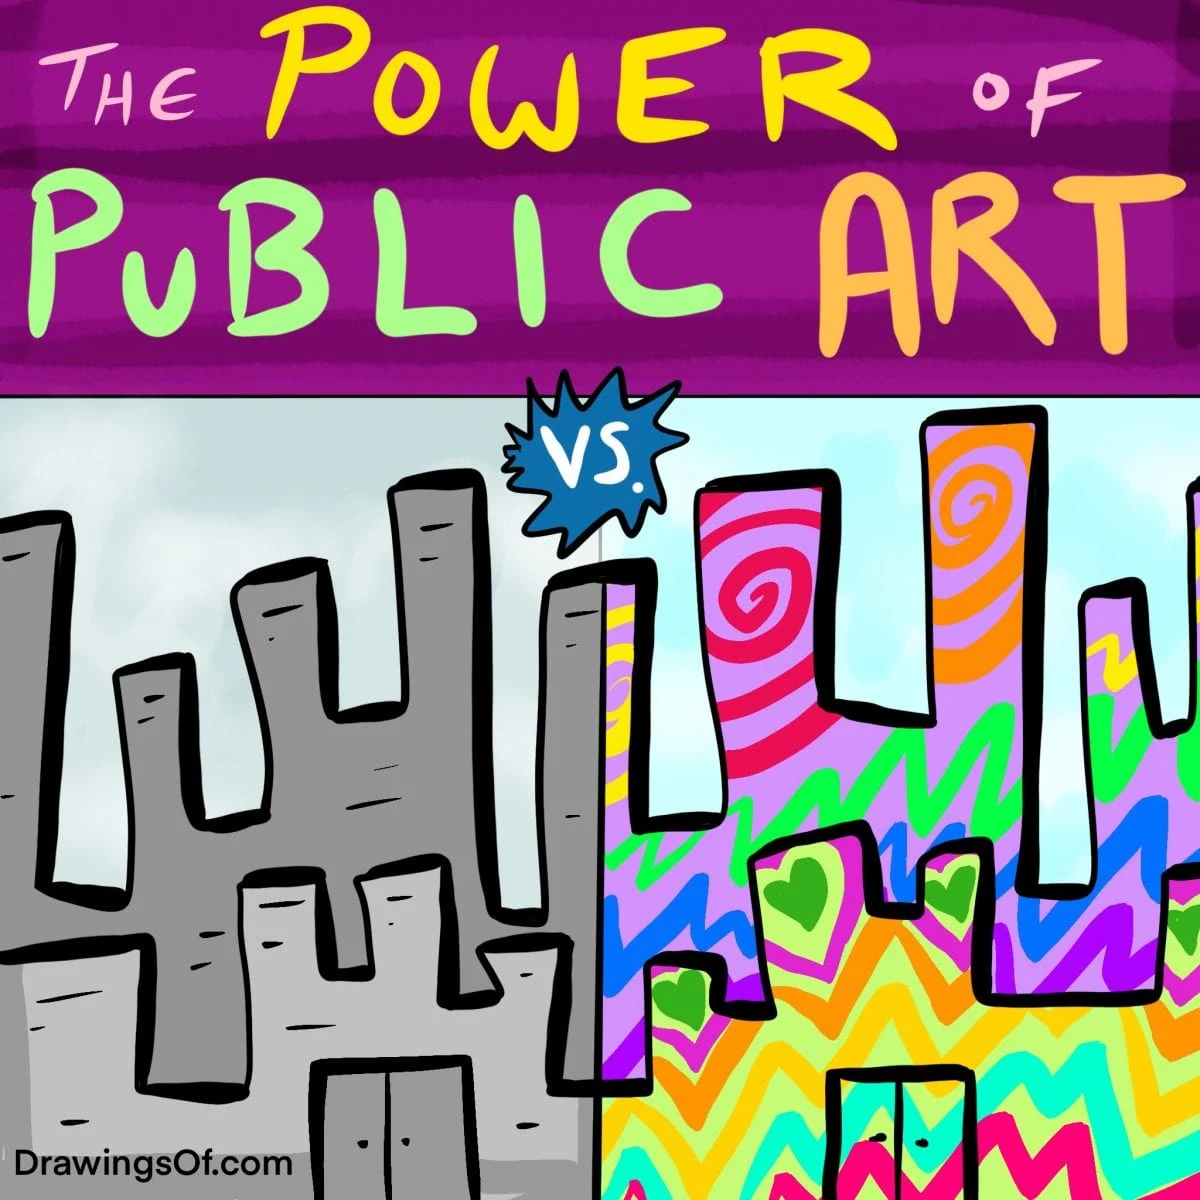 Why is public art important and powerful?